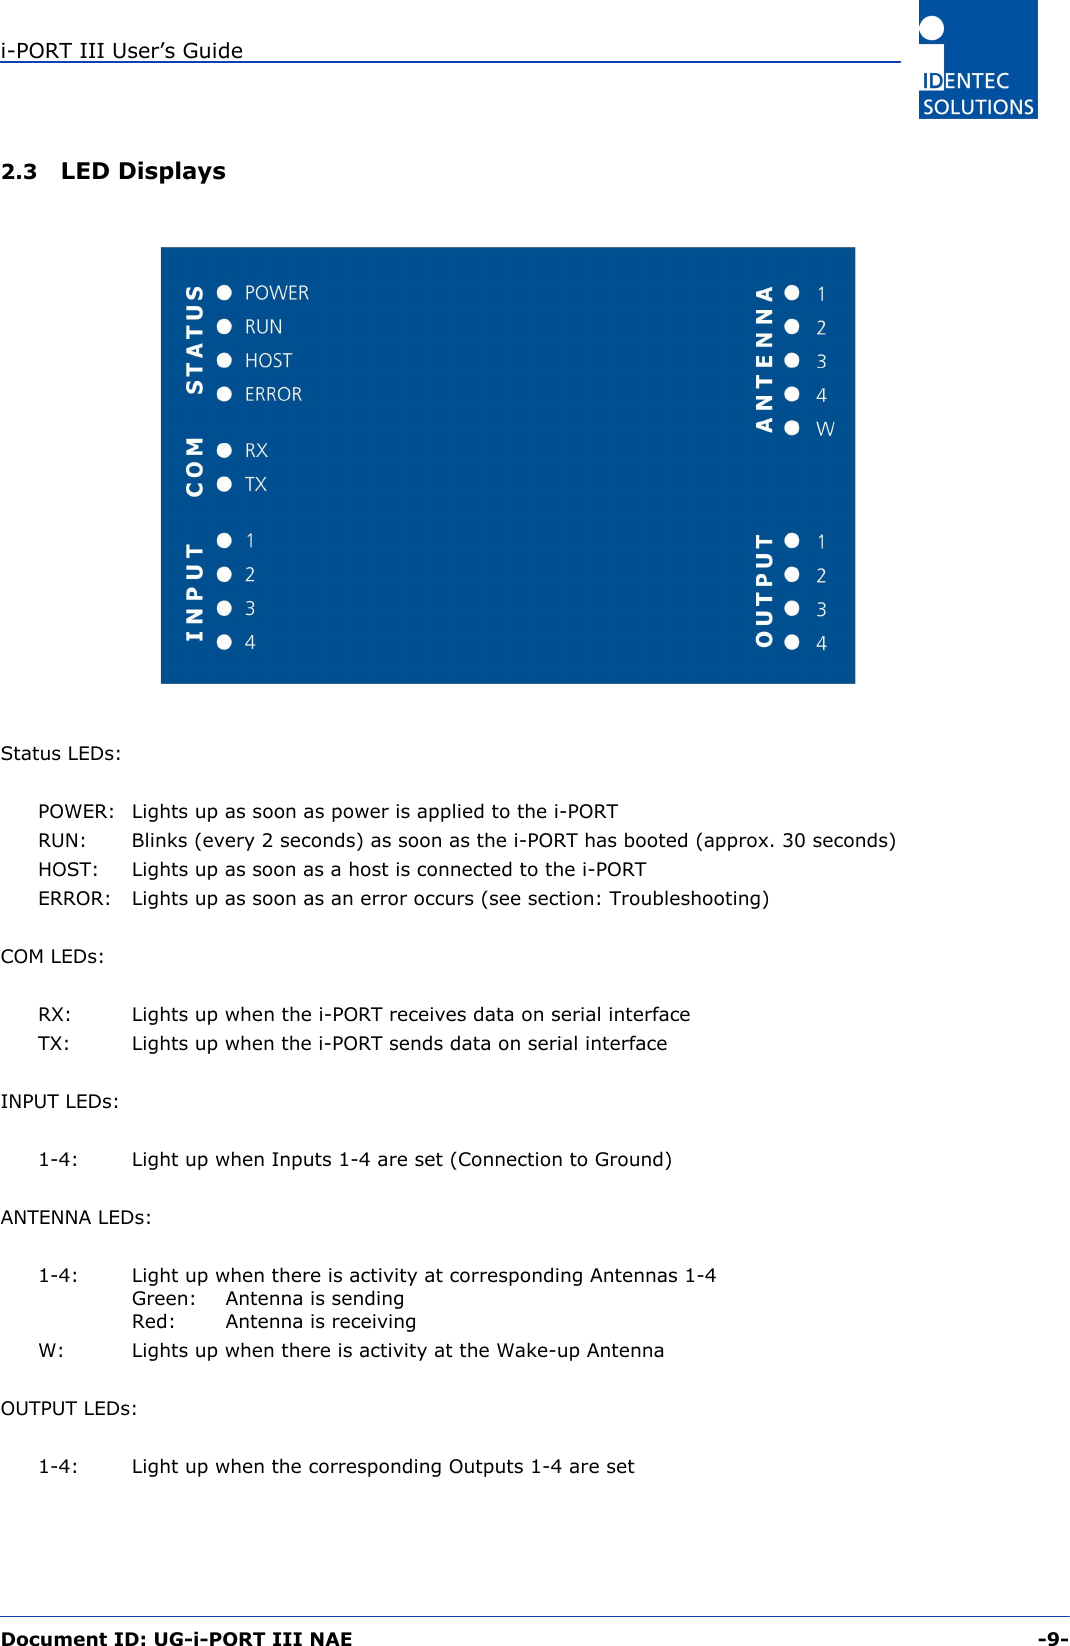 i-PORT III User’s Guide  Document ID: UG-i-PORT III NAE     -9-  2.3  LED Displays     Status LEDs:    POWER:  Lights up as soon as power is applied to the i-PORT    RUN:  Blinks (every 2 seconds) as soon as the i-PORT has booted (approx. 30 seconds)   HOST:  Lights up as soon as a host is connected to the i-PORT   ERROR:  Lights up as soon as an error occurs (see section: Troubleshooting)  COM LEDs:    RX:  Lights up when the i-PORT receives data on serial interface   TX:  Lights up when the i-PORT sends data on serial interface  INPUT LEDs:    1-4:  Light up when Inputs 1-4 are set (Connection to Ground)  ANTENNA LEDs:    1-4:  Light up when there is activity at corresponding Antennas 1-4 Green:  Antenna is sending Red:  Antenna is receiving   W:  Lights up when there is activity at the Wake-up Antenna  OUTPUT LEDs:    1-4:  Light up when the corresponding Outputs 1-4 are set  